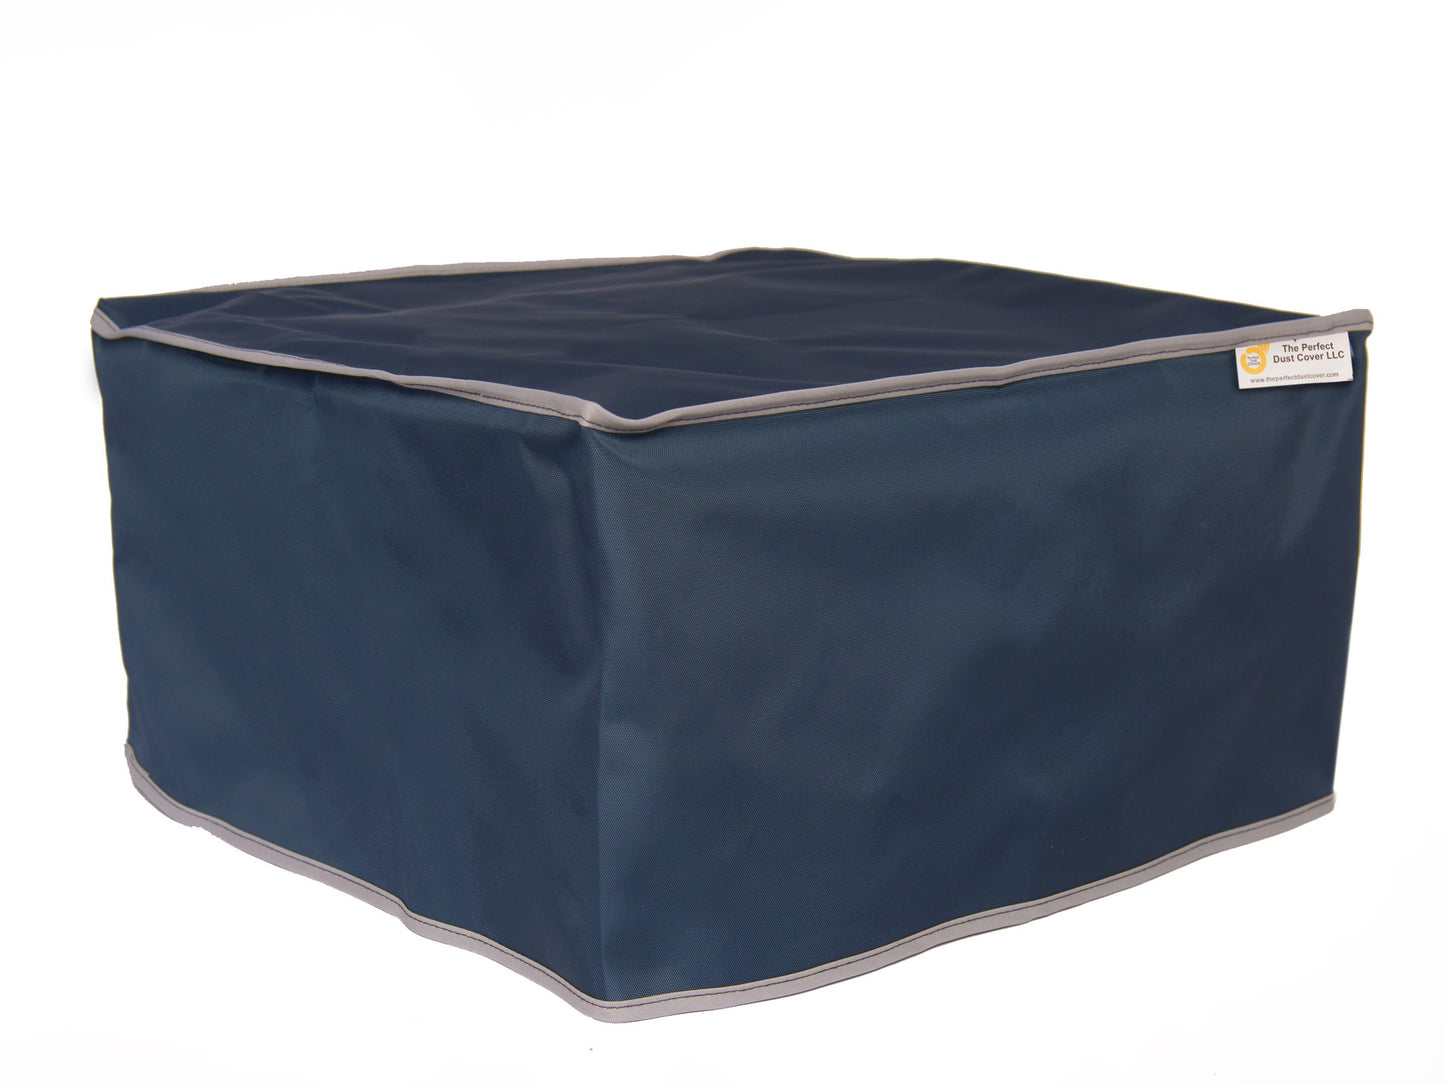 The Perfect Dust Cover, Navy Blue Nylon Cover Compatible with Raise3D DF2 Solution 3D Printer, Anti Static, Double Stitched and Waterproof Dust Cover Dimensions 17.7''W x 15.7''D x 28.7''H by The Perfect Dust Cover LLC